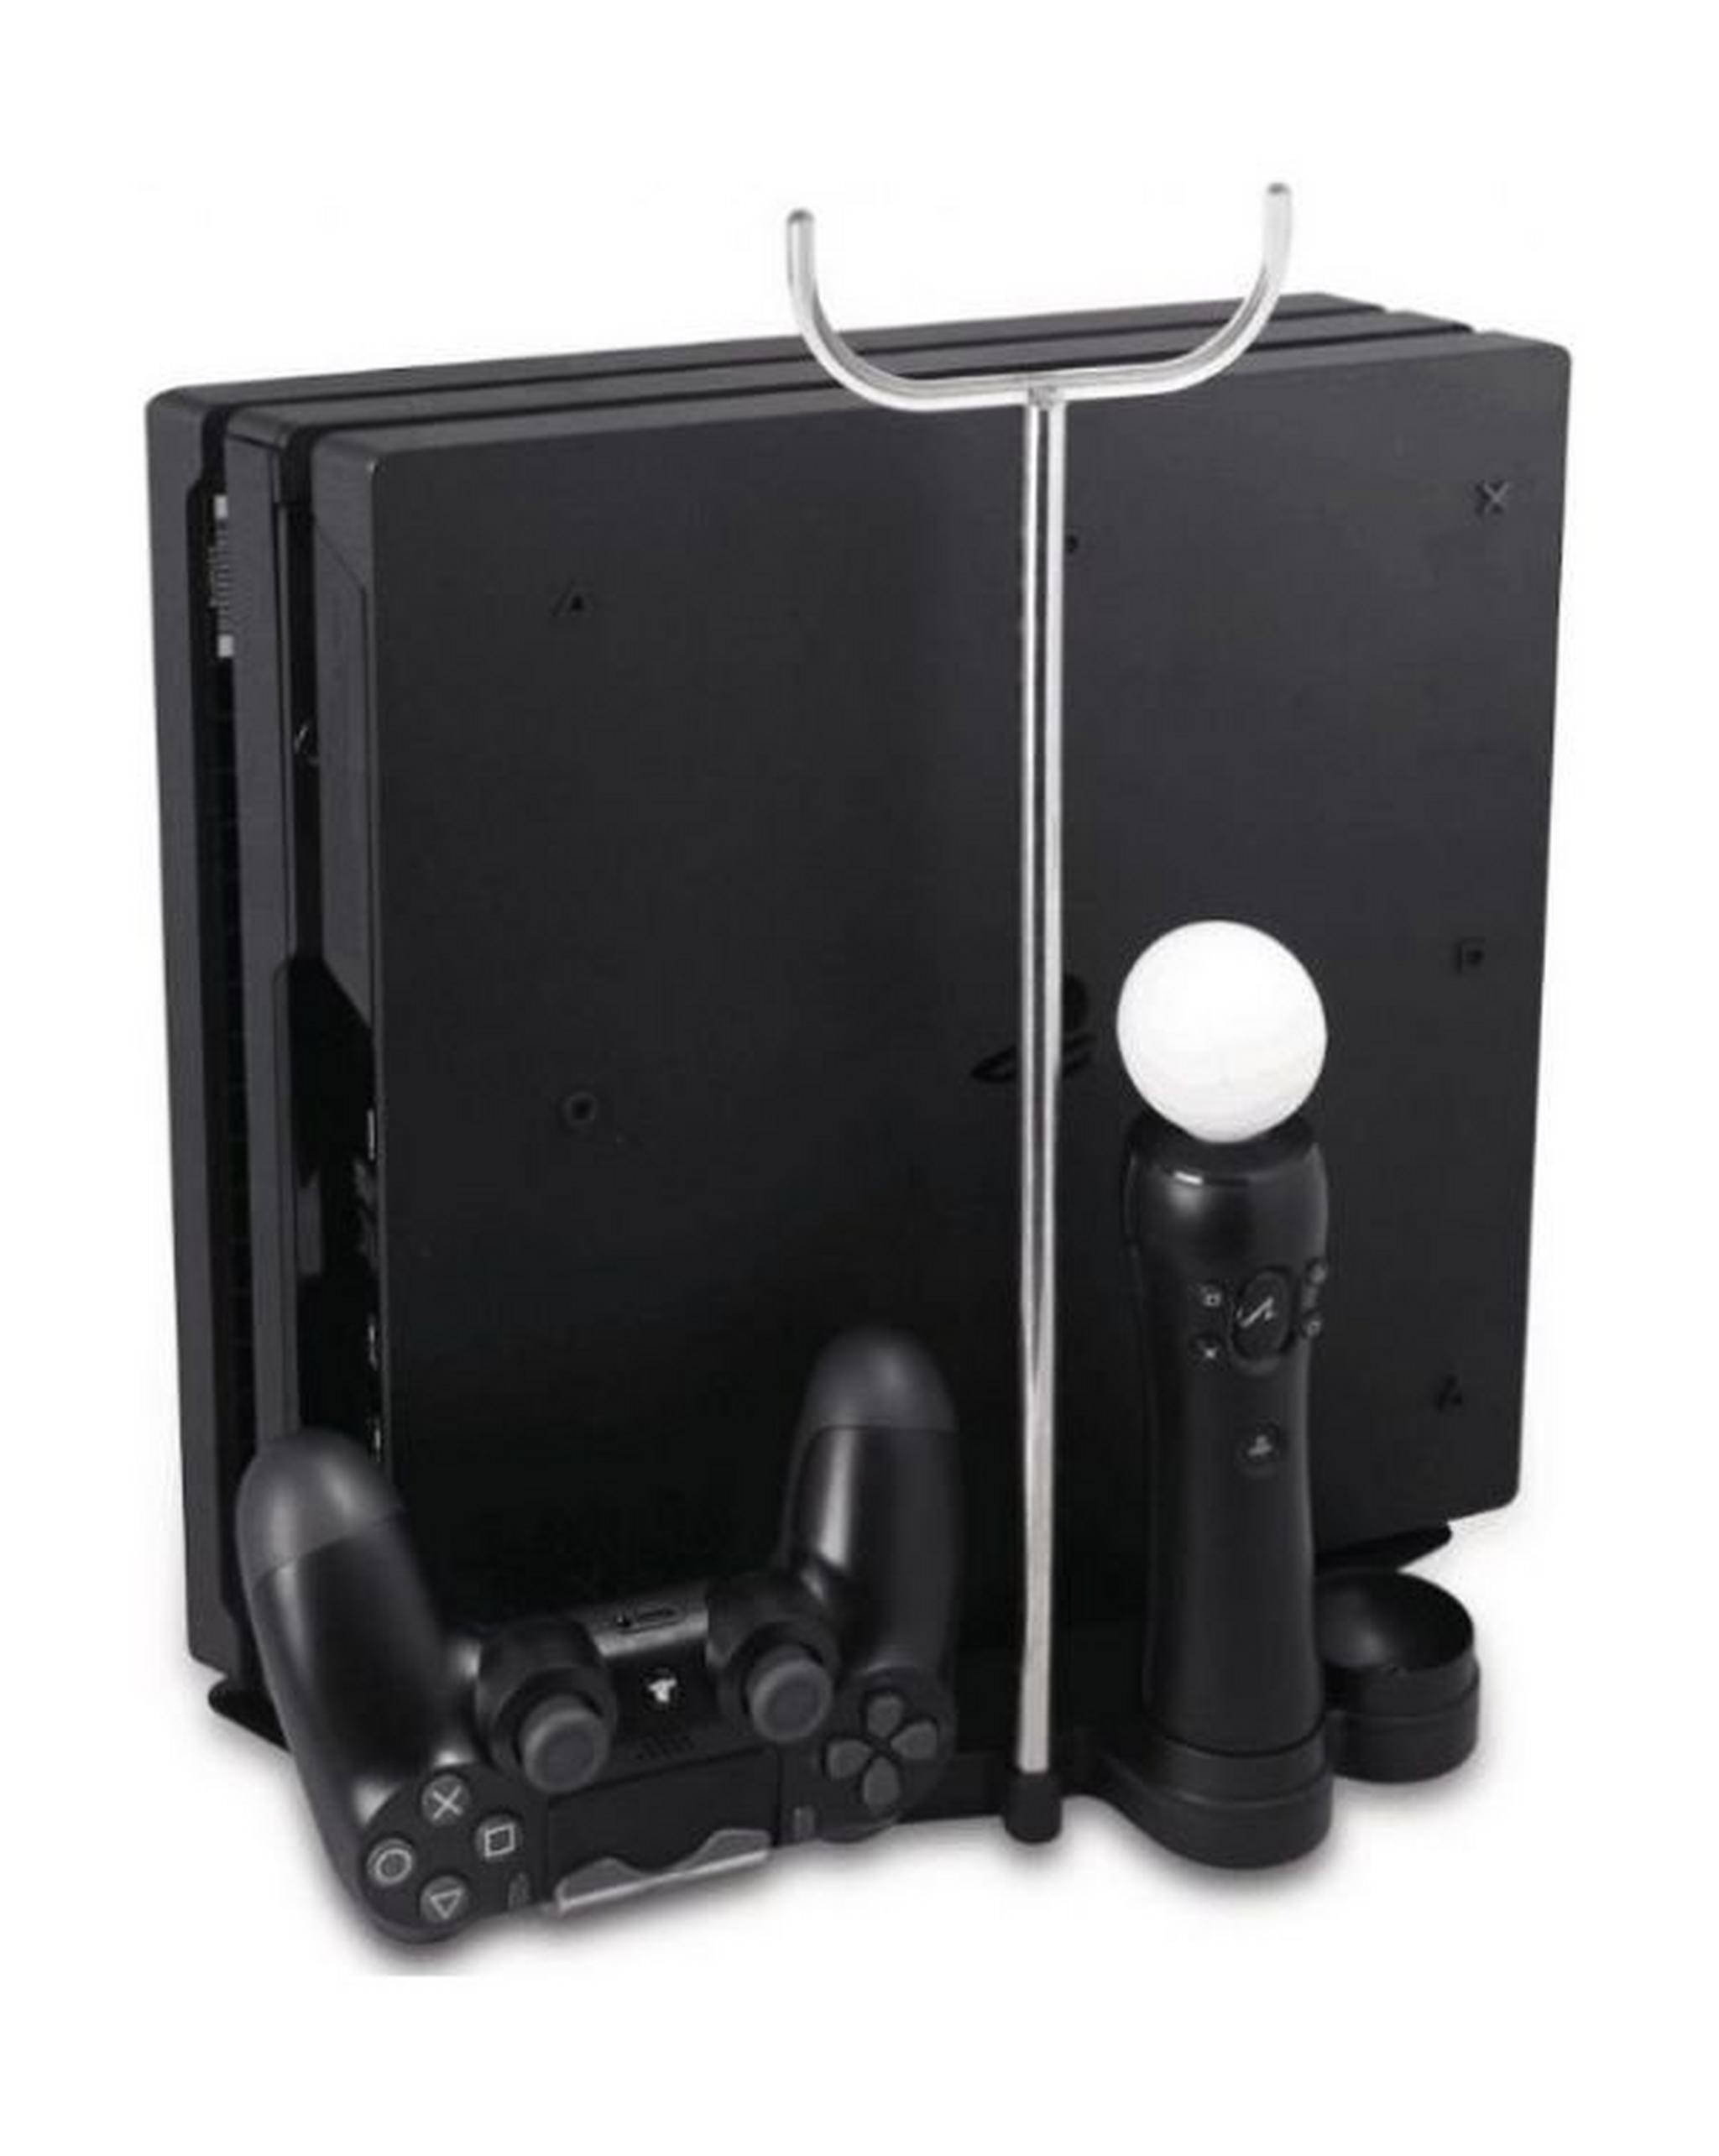 PlayStation 4 5 in 1 Multi-functional Stand